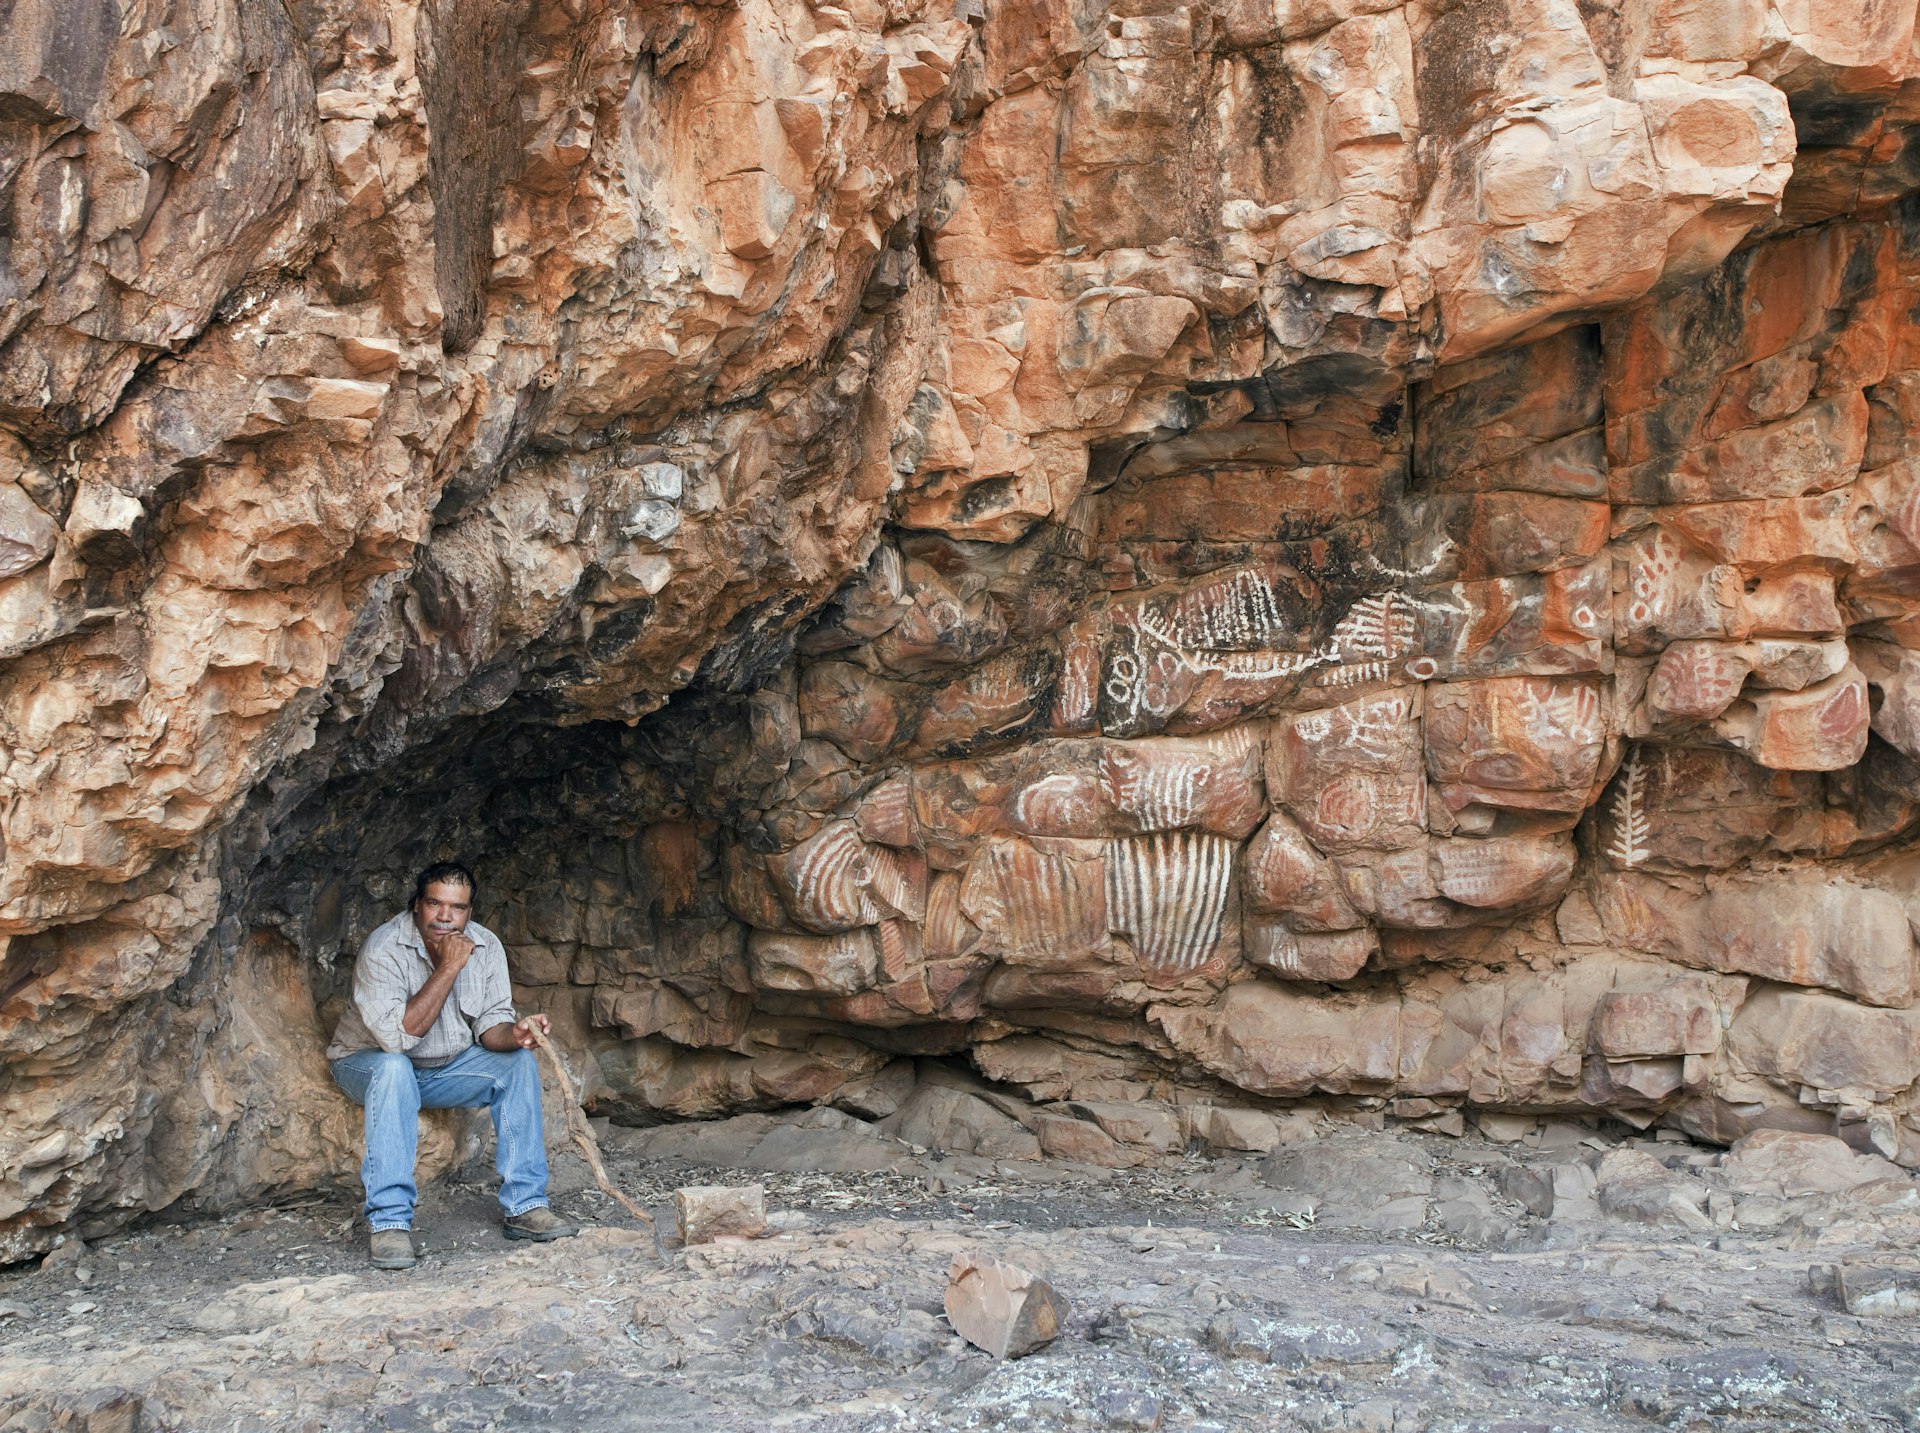 An Aboriginal man sits at the base of a large rock face daubed with rock art drawings